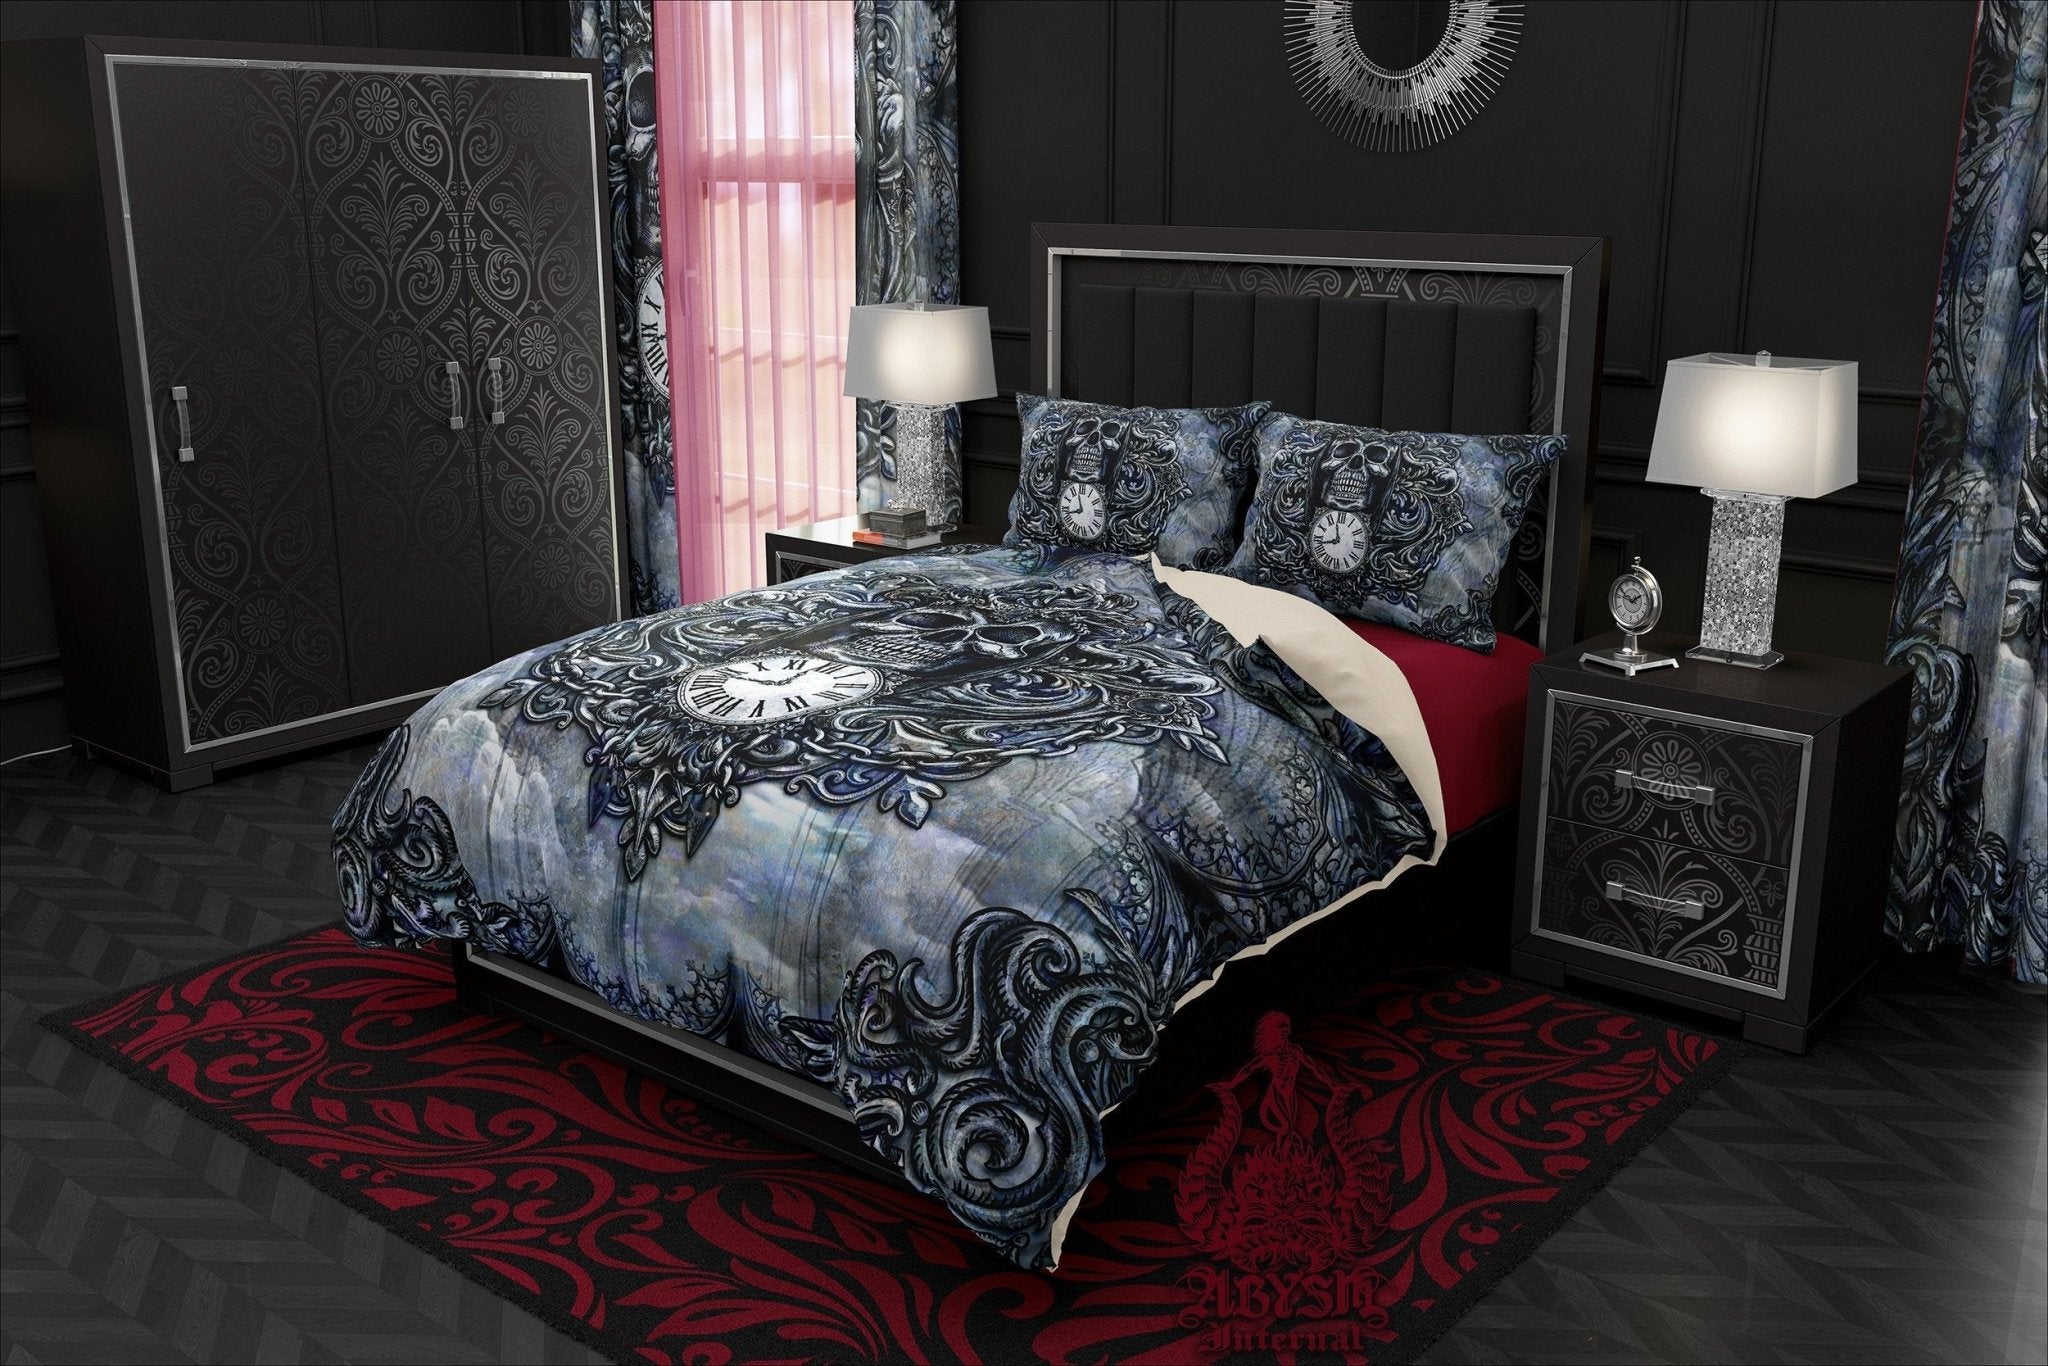 Skull Bedding Set, Comforter and Duvet, Goth Bed Cover and Bedroom Decor, King, Queen and Twin Size - Reaper, Blue - Abysm Internal